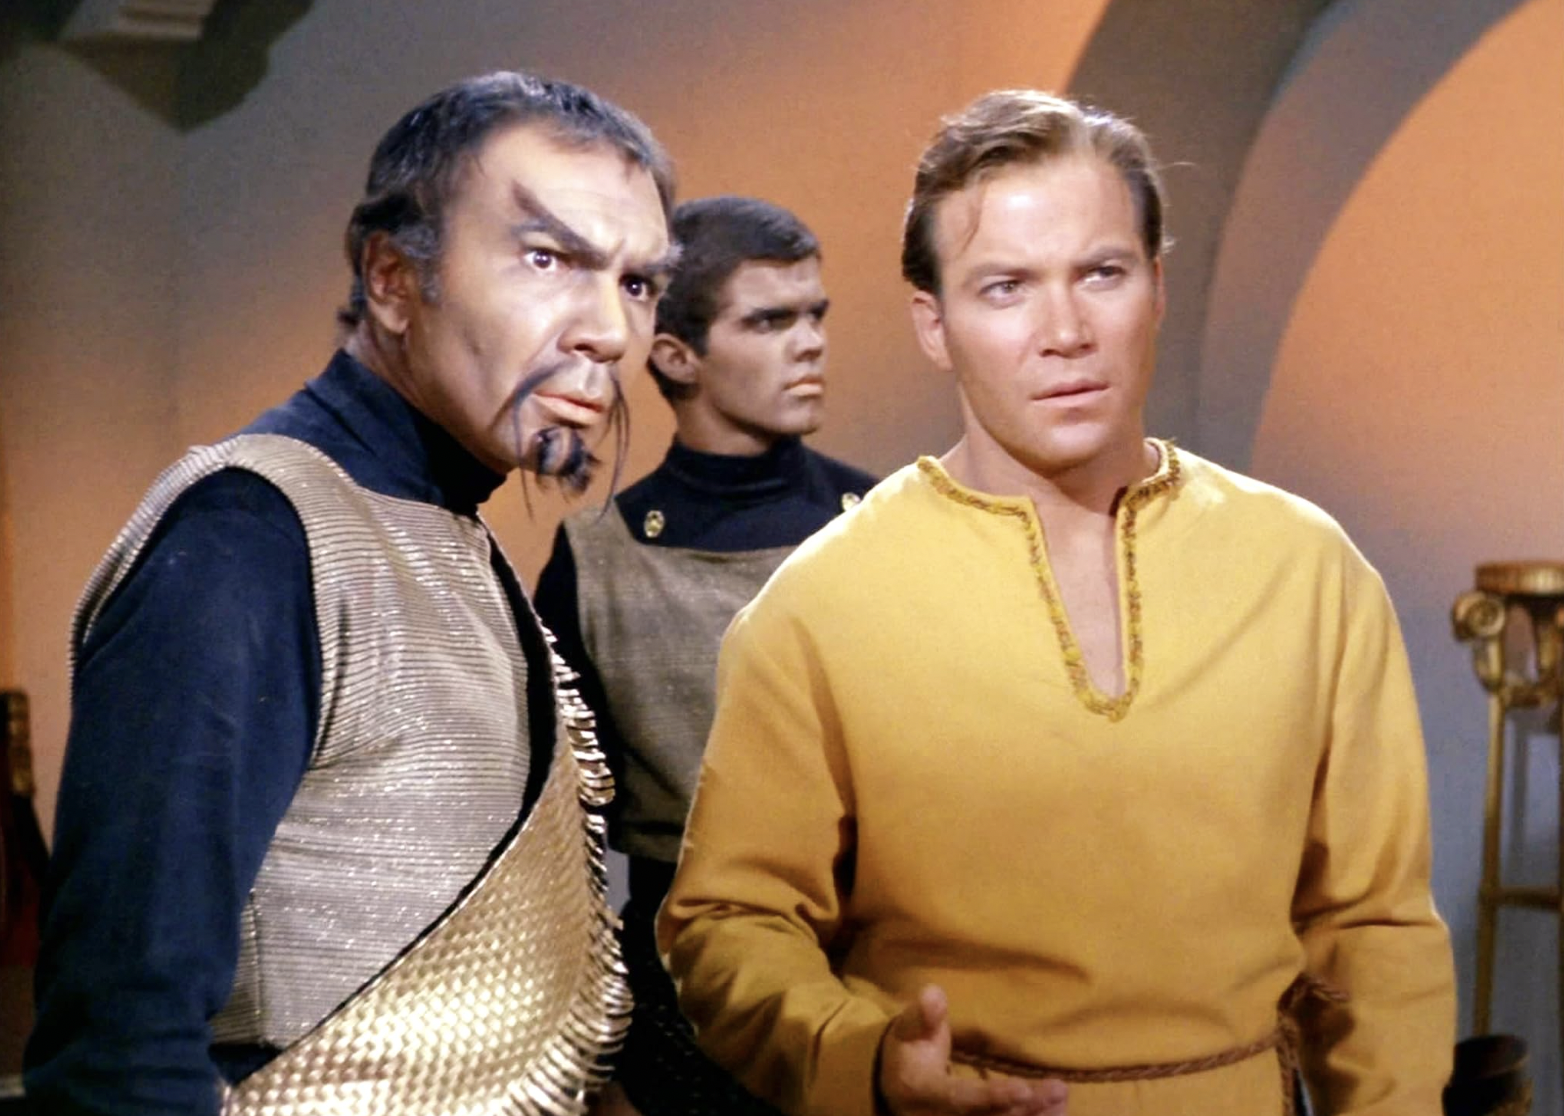 <p>- IMDb user rating: 8.1<br> - Season 1, Episode 26<br> - Director: John Newland</p>  <p>Episode 26 of Season One utilizes the Klingons as the main foes, with "Errand of Mercy" depicting the beginning of a war between the Federation and the Klingon Empire. Kirk and Spock visit a neutral planet near the Klingon Border called Organia and attempt to convince its people to resist Klingon forces in this <a href="https://www.dailydot.com/parsec/klingon-star-trek-netflix/">Cold War allegory episode</a>. While the peaceful Organians appear to be primitive at first, they soon surprise Kirk and Spock as well as the Klingons. The main antagonist, the Klingon named Kor, <a href="https://www.startrek.com/database_article/kor">returns in "Deep Space Nine."</a></p>